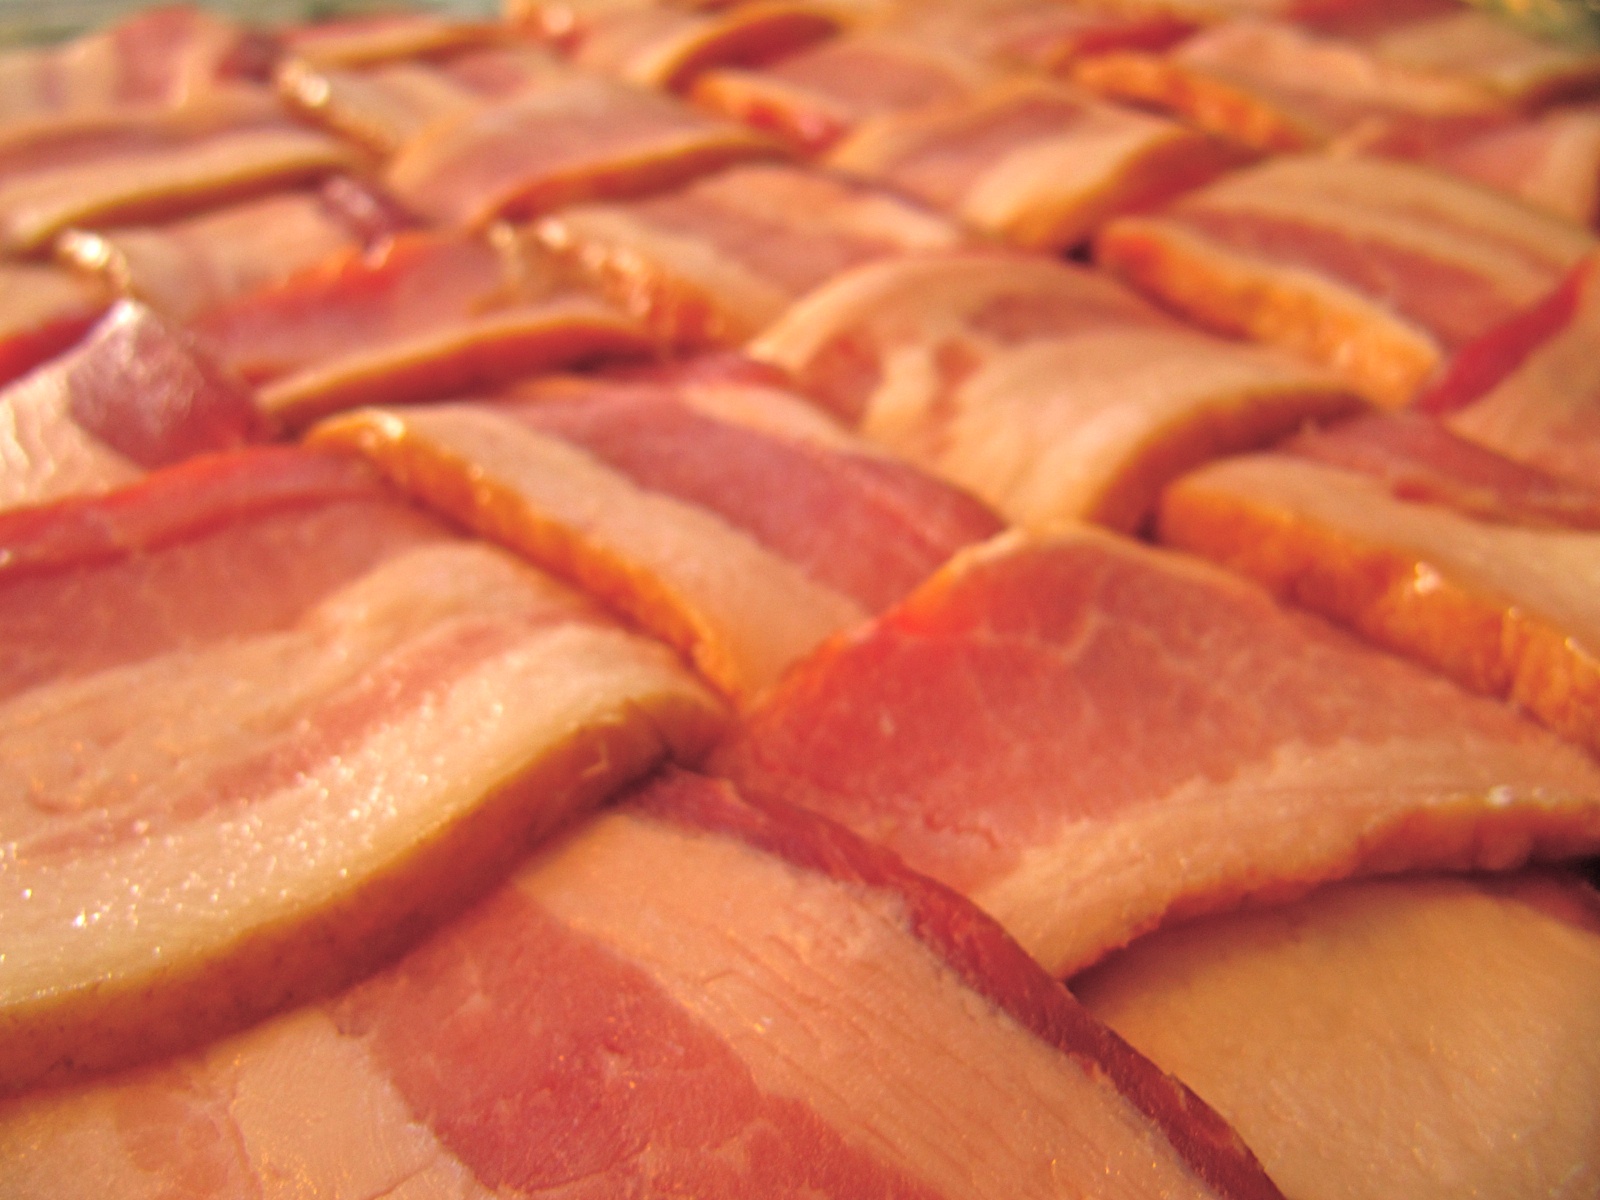 A raw bacon weave, ready to be wrapped around something